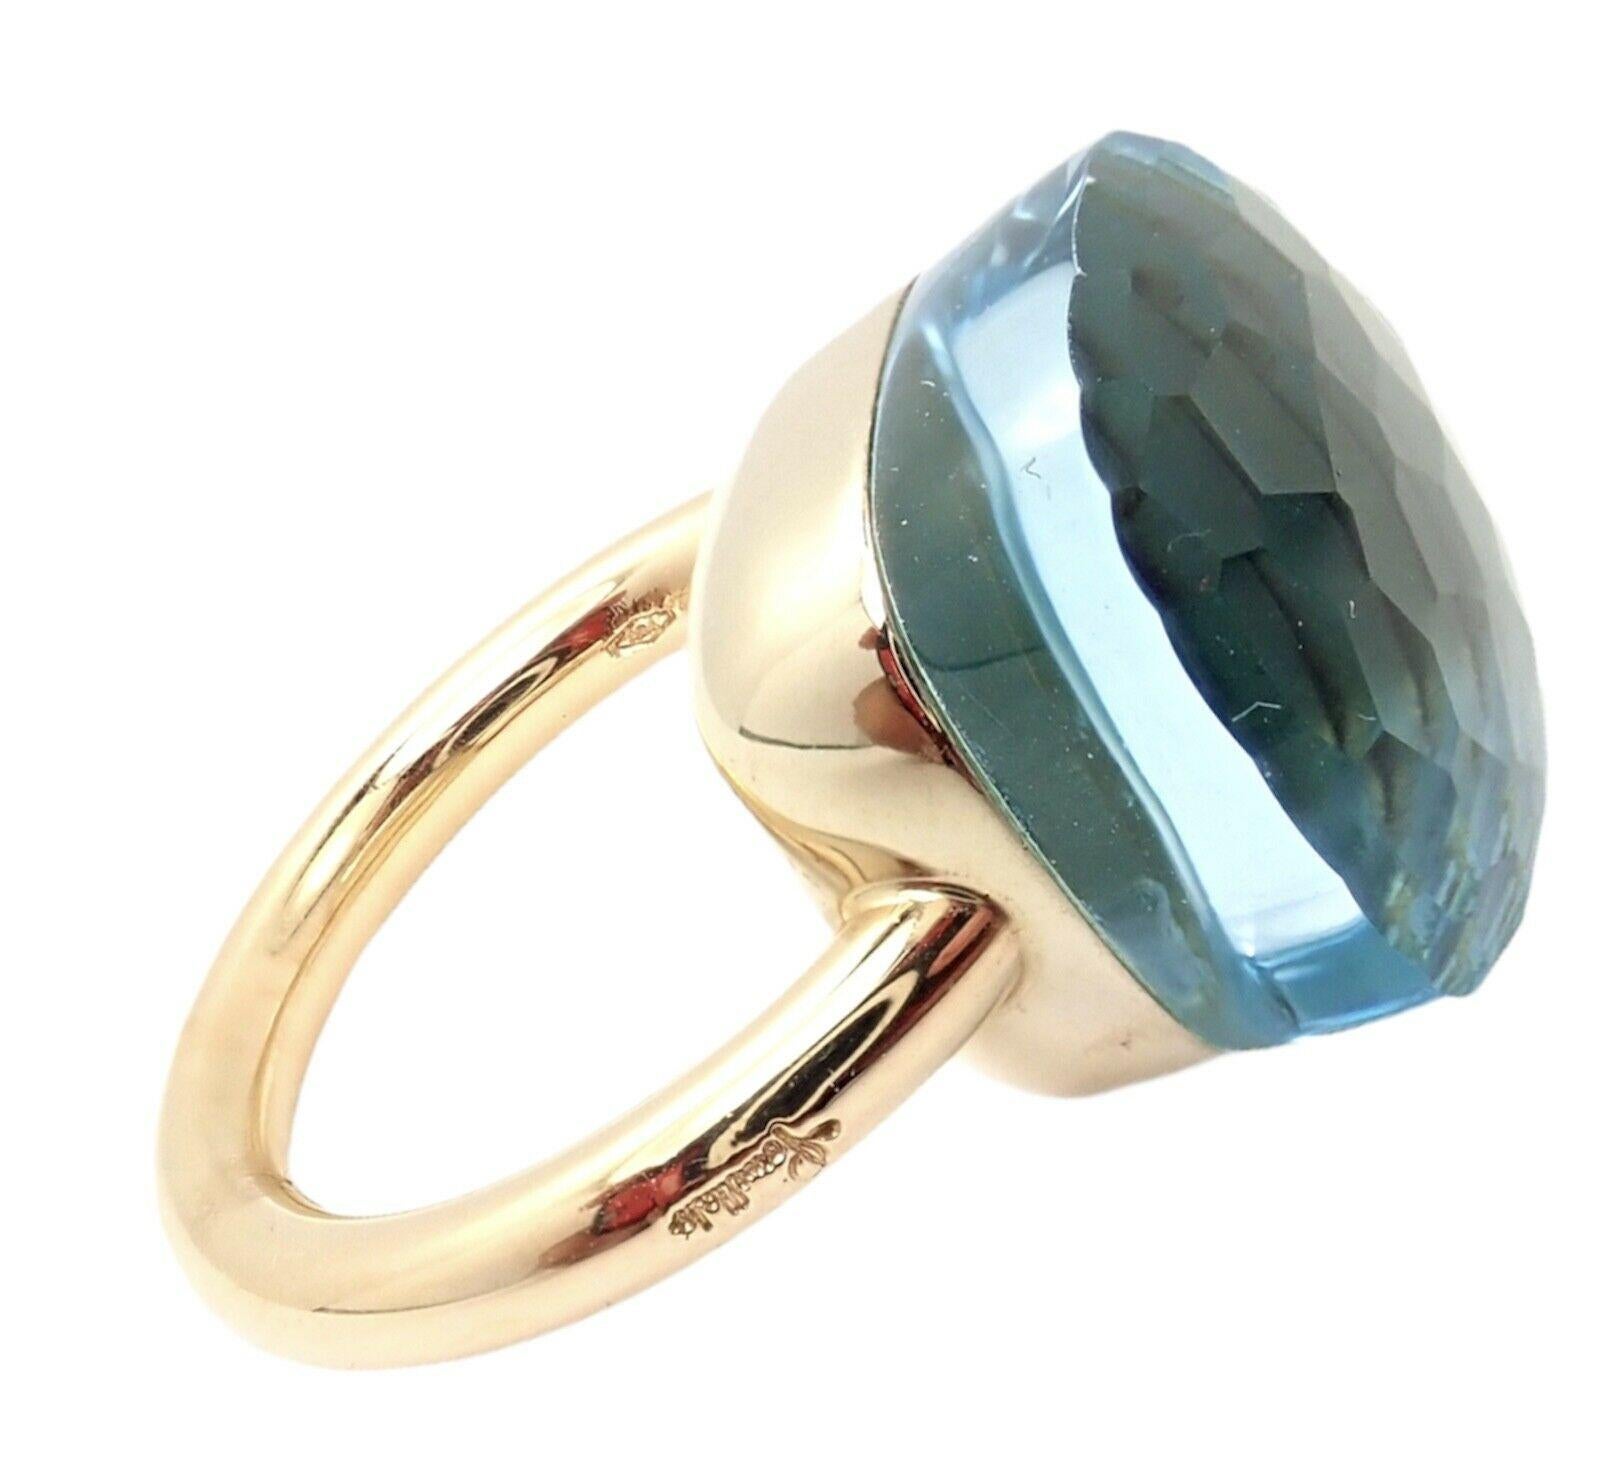 18k Yellow Gold Nudo Maxi Large Size Blue Topaz Ring by Pomellato. 
With 1 large blue topaz stone 16mm x 16mm.
Details:
Size: European 52, US 6
Width: 16mm
Weight: 16 grams
Stamped Hallmarks:  Pomellato 750 52
*Free Shipping within the United